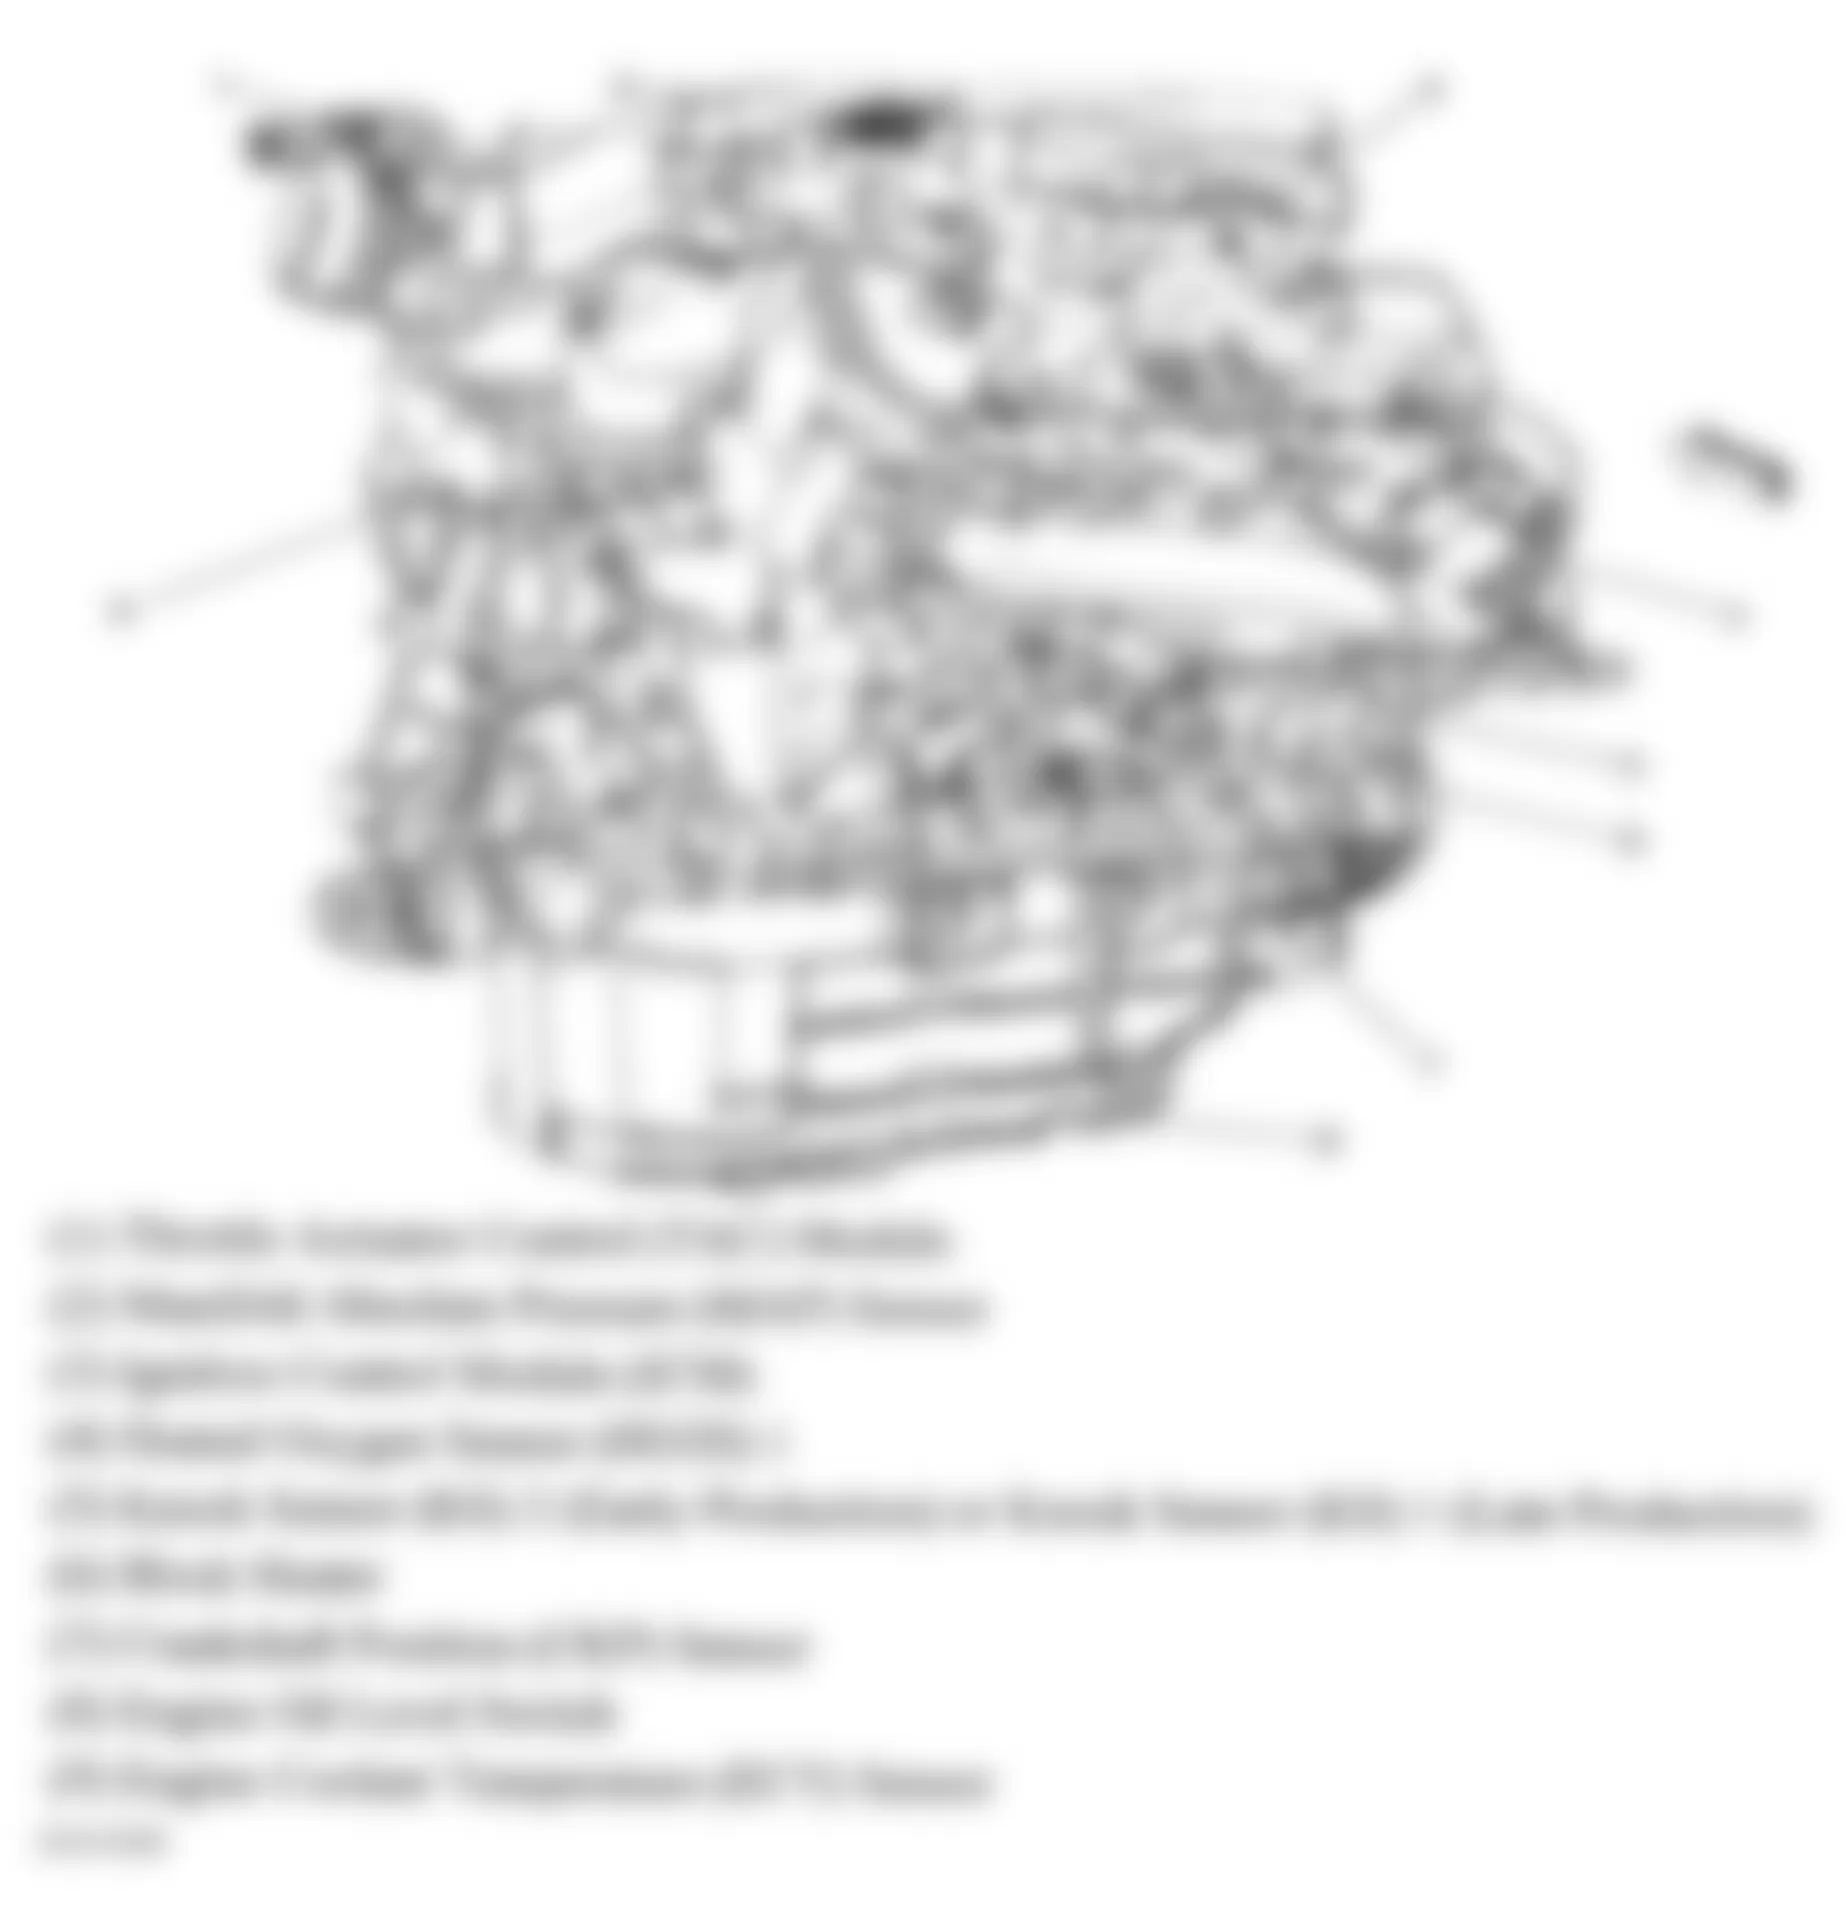 Buick Terraza CXL 2006 - Component Locations -  Rear Of Engine (3.9L)